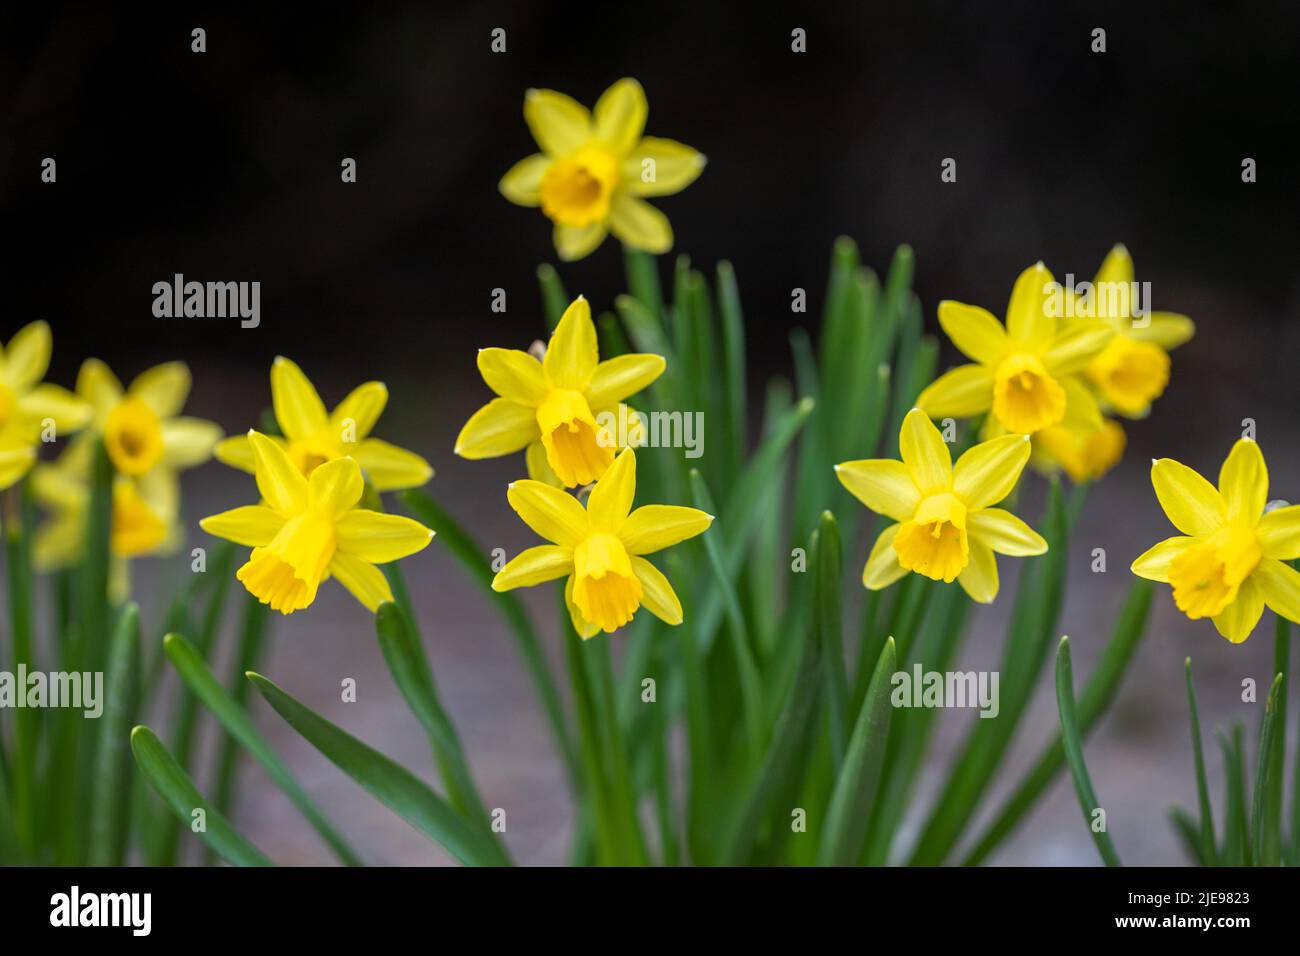 Blooming flowerbed of yellows narcissus on a black background. Stock Photo